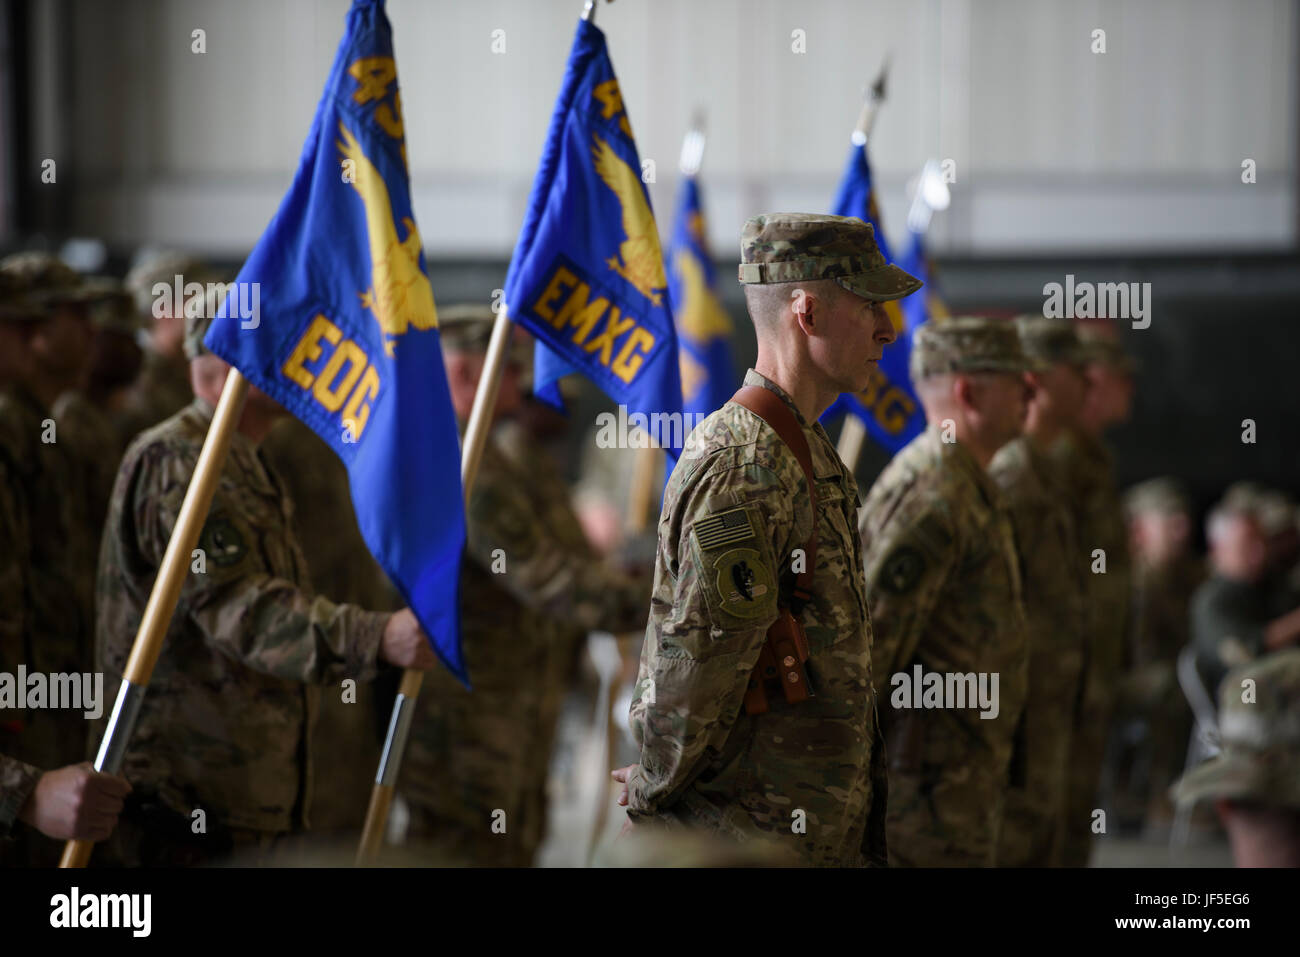 Col. Jason Bailey, the 455th Expeditionary Operations Group commander, stands at parade rest during a change of command ceremony at Bagram Airfield, Afghanistan, June 3, 2017. During the ceremony, Brig. Gen. Jim Sears relinquished command of the 455th Air Expeditionary Wing to Brig. Gen Craig Baker. (U.S. Air Force photo by Staff Sgt. Benjamin Gonsier) Stock Photo